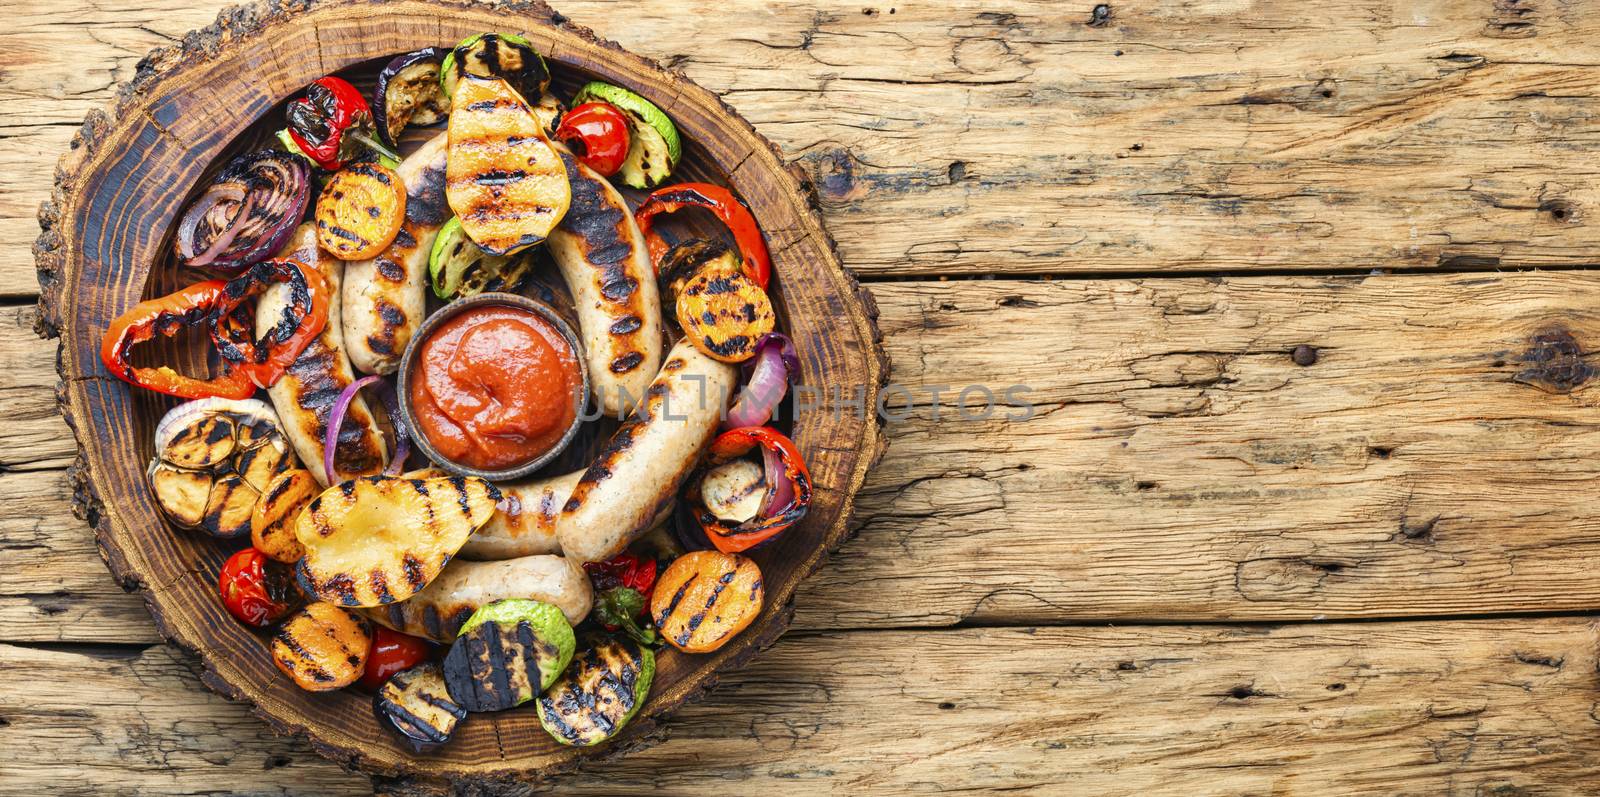 Grilled sausages fried with pear and vegetables. Autumn food.